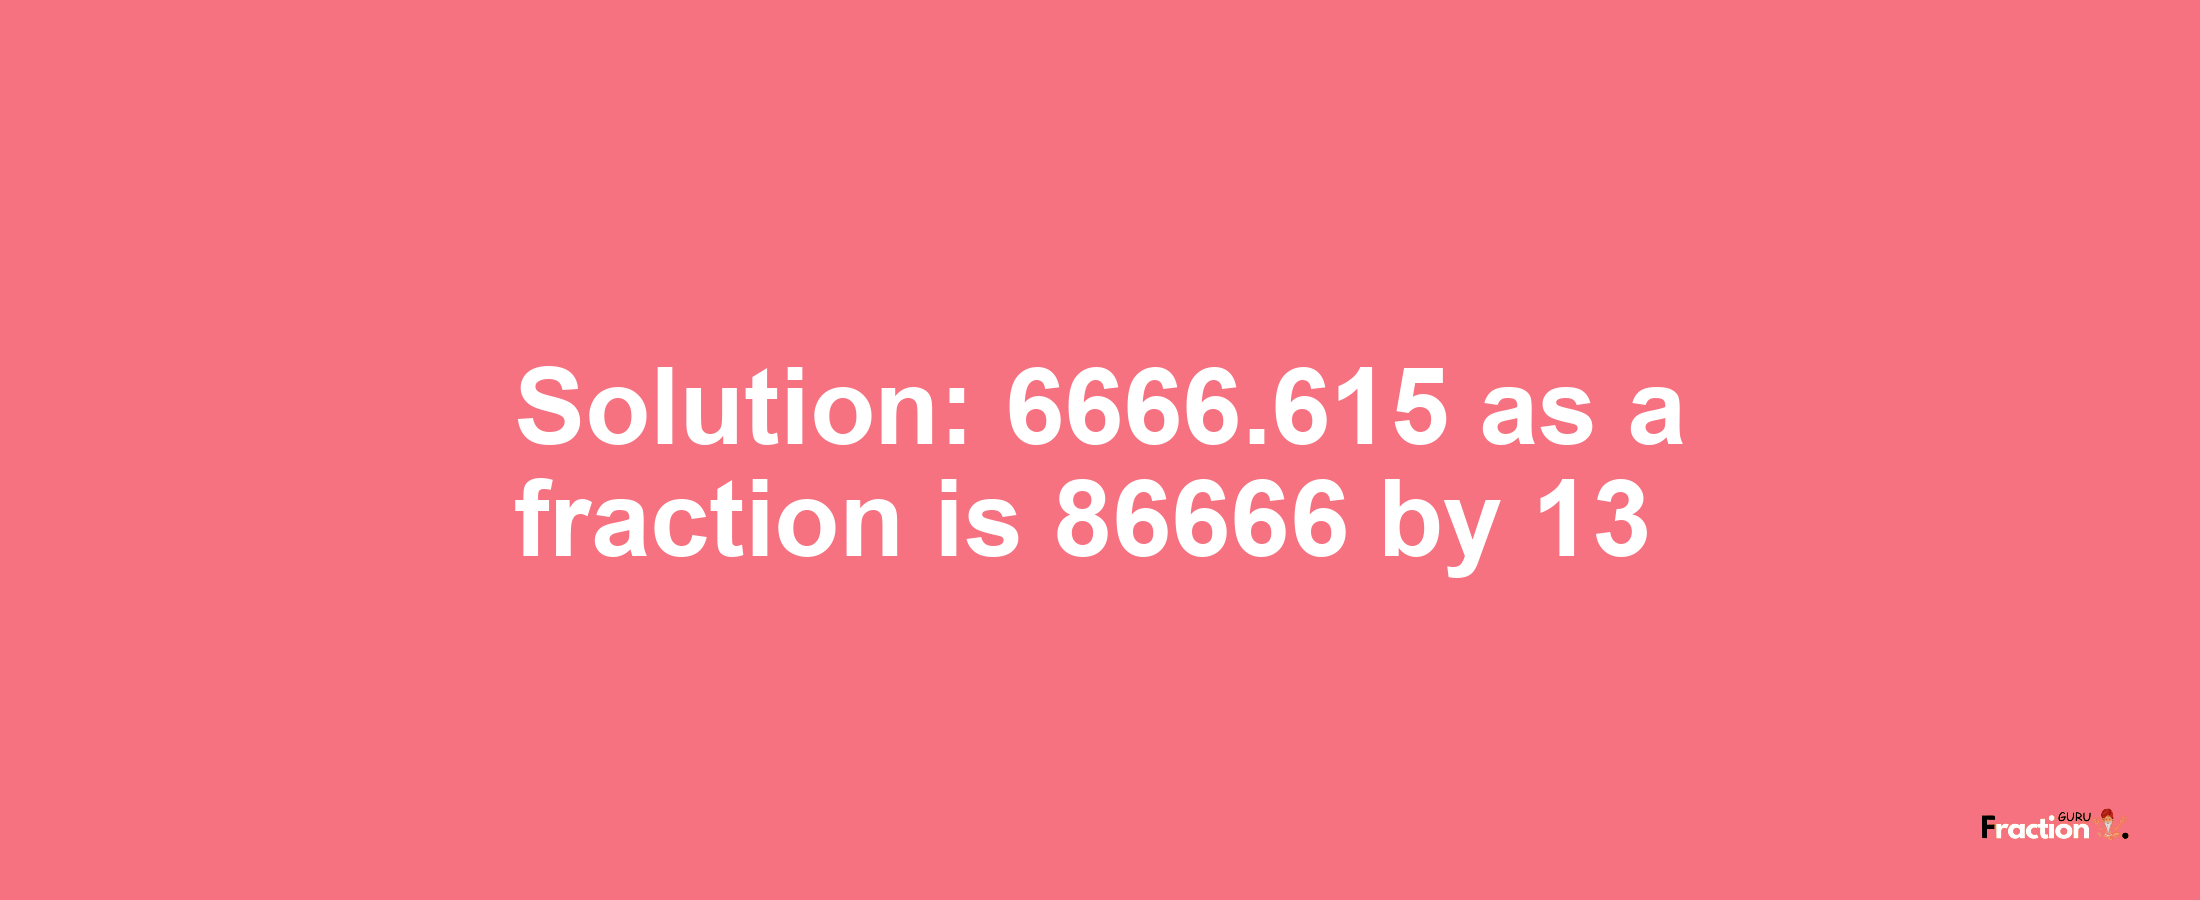 Solution:6666.615 as a fraction is 86666/13